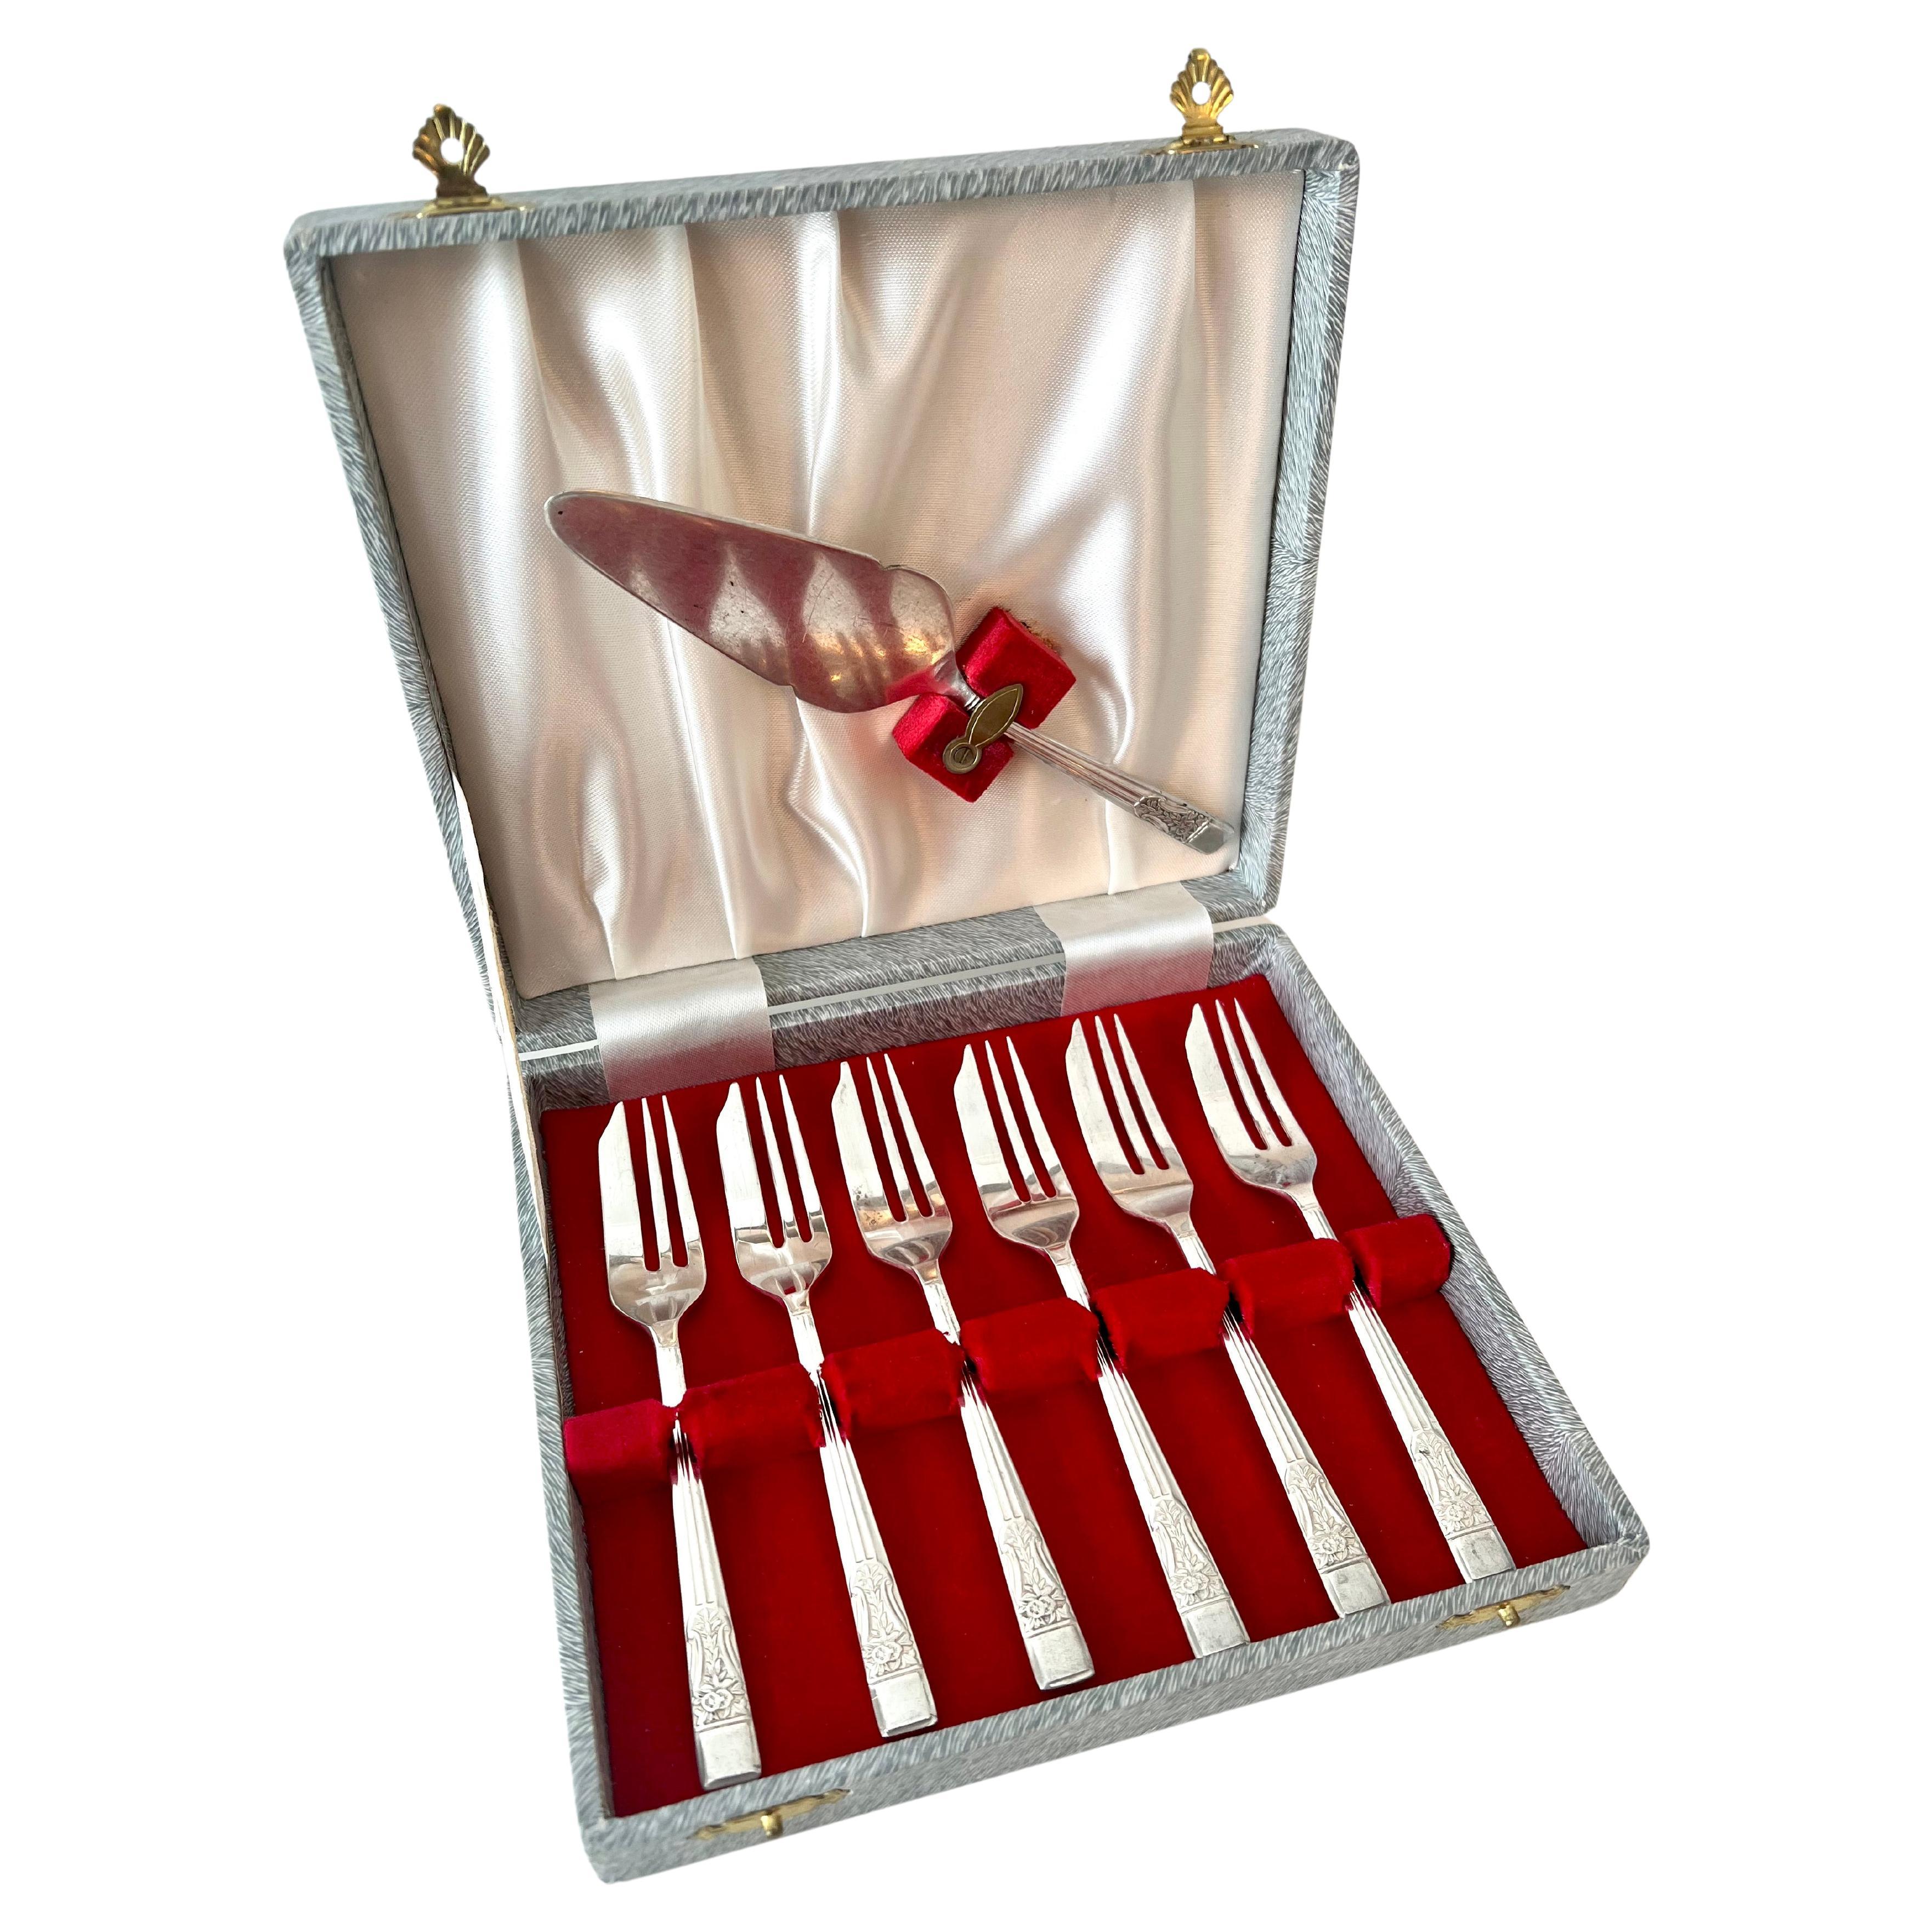 Six Silver Plate Dessert Forks with Server in Box For Sale